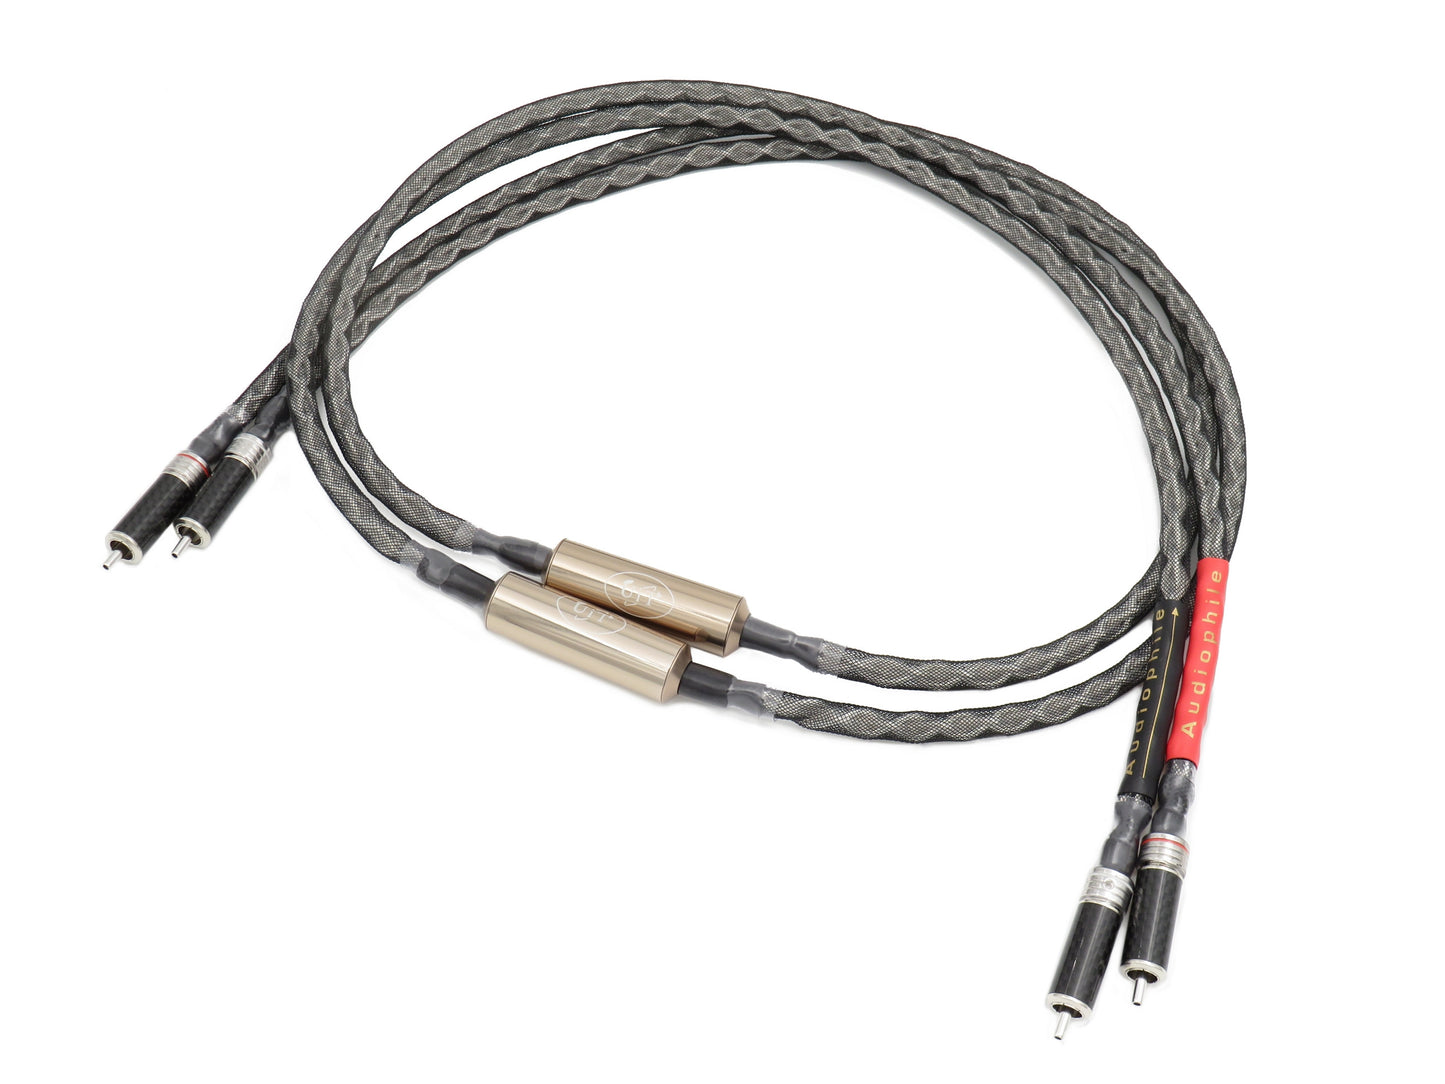 IMP-RCA - Perfect Music Purifier Interconnect Cable (RCA Connector)